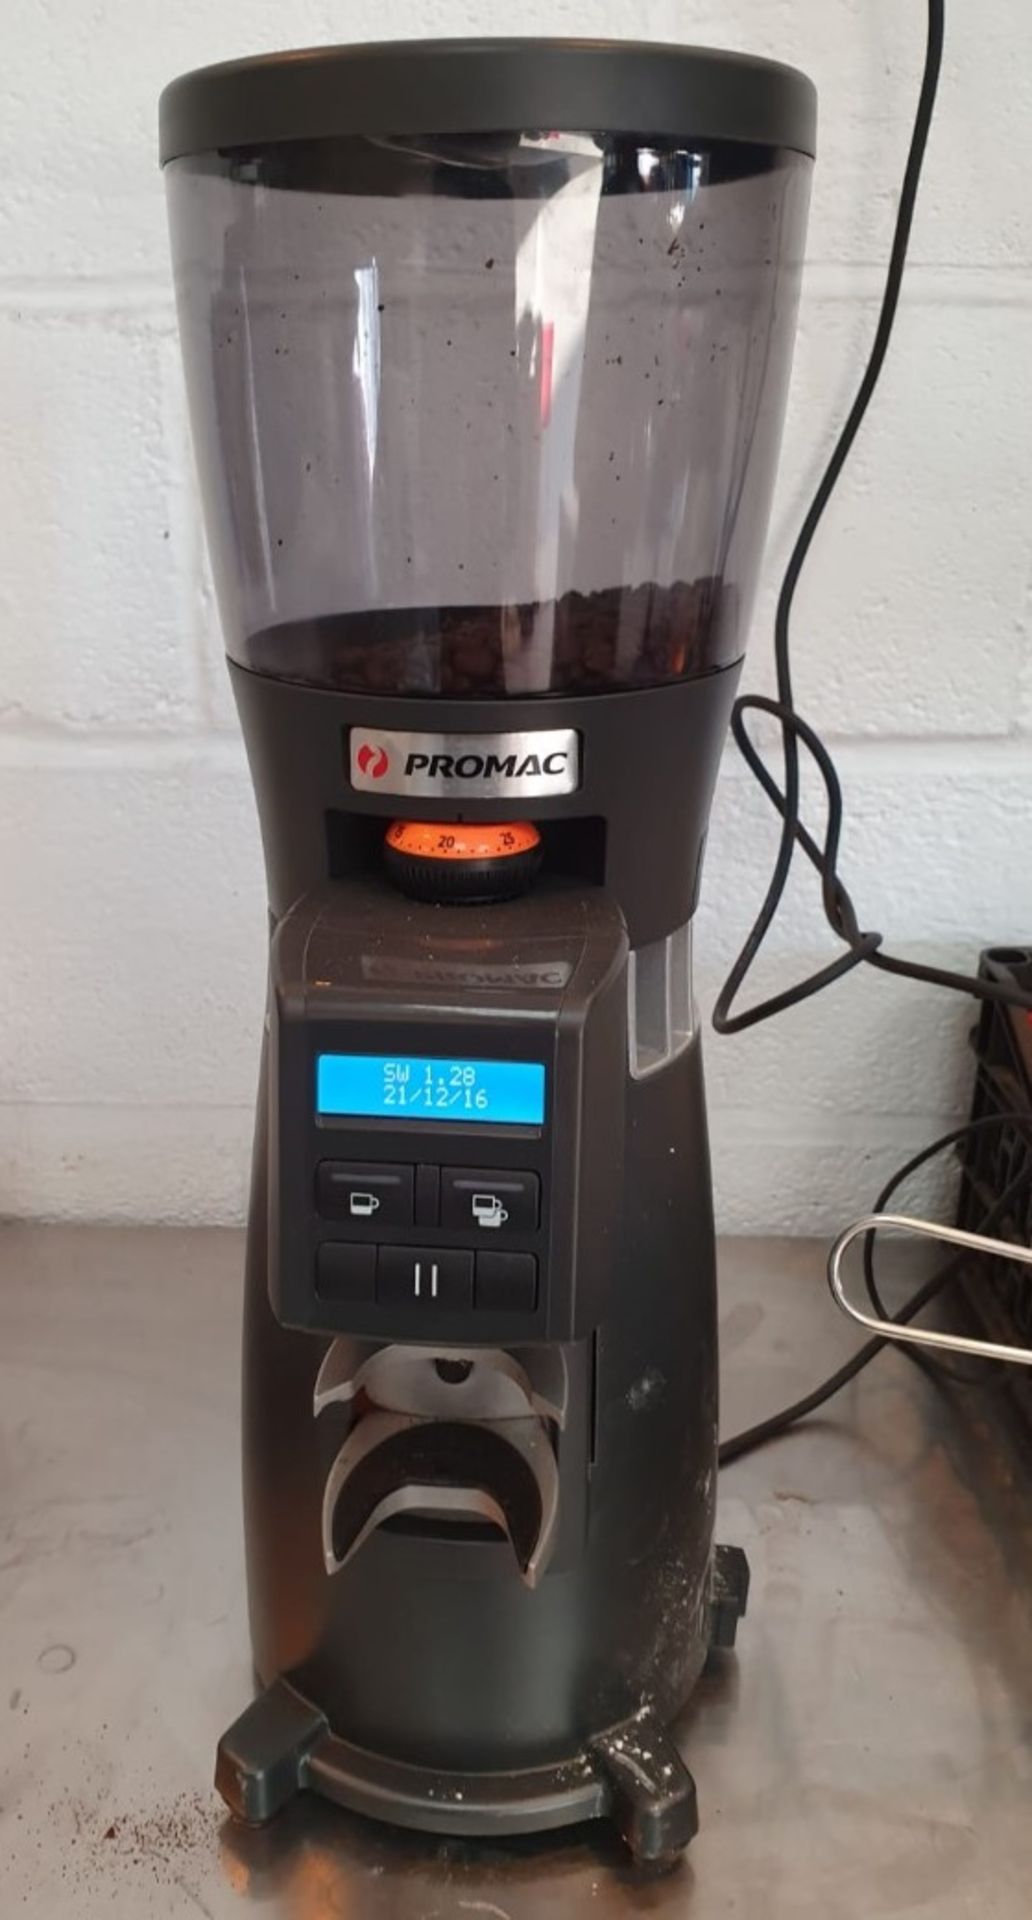 1 x PROMAC Commercial Coffee Grinder - Ref: UK - CL482 - Location: Altrincham WA14MORE INFORMATION